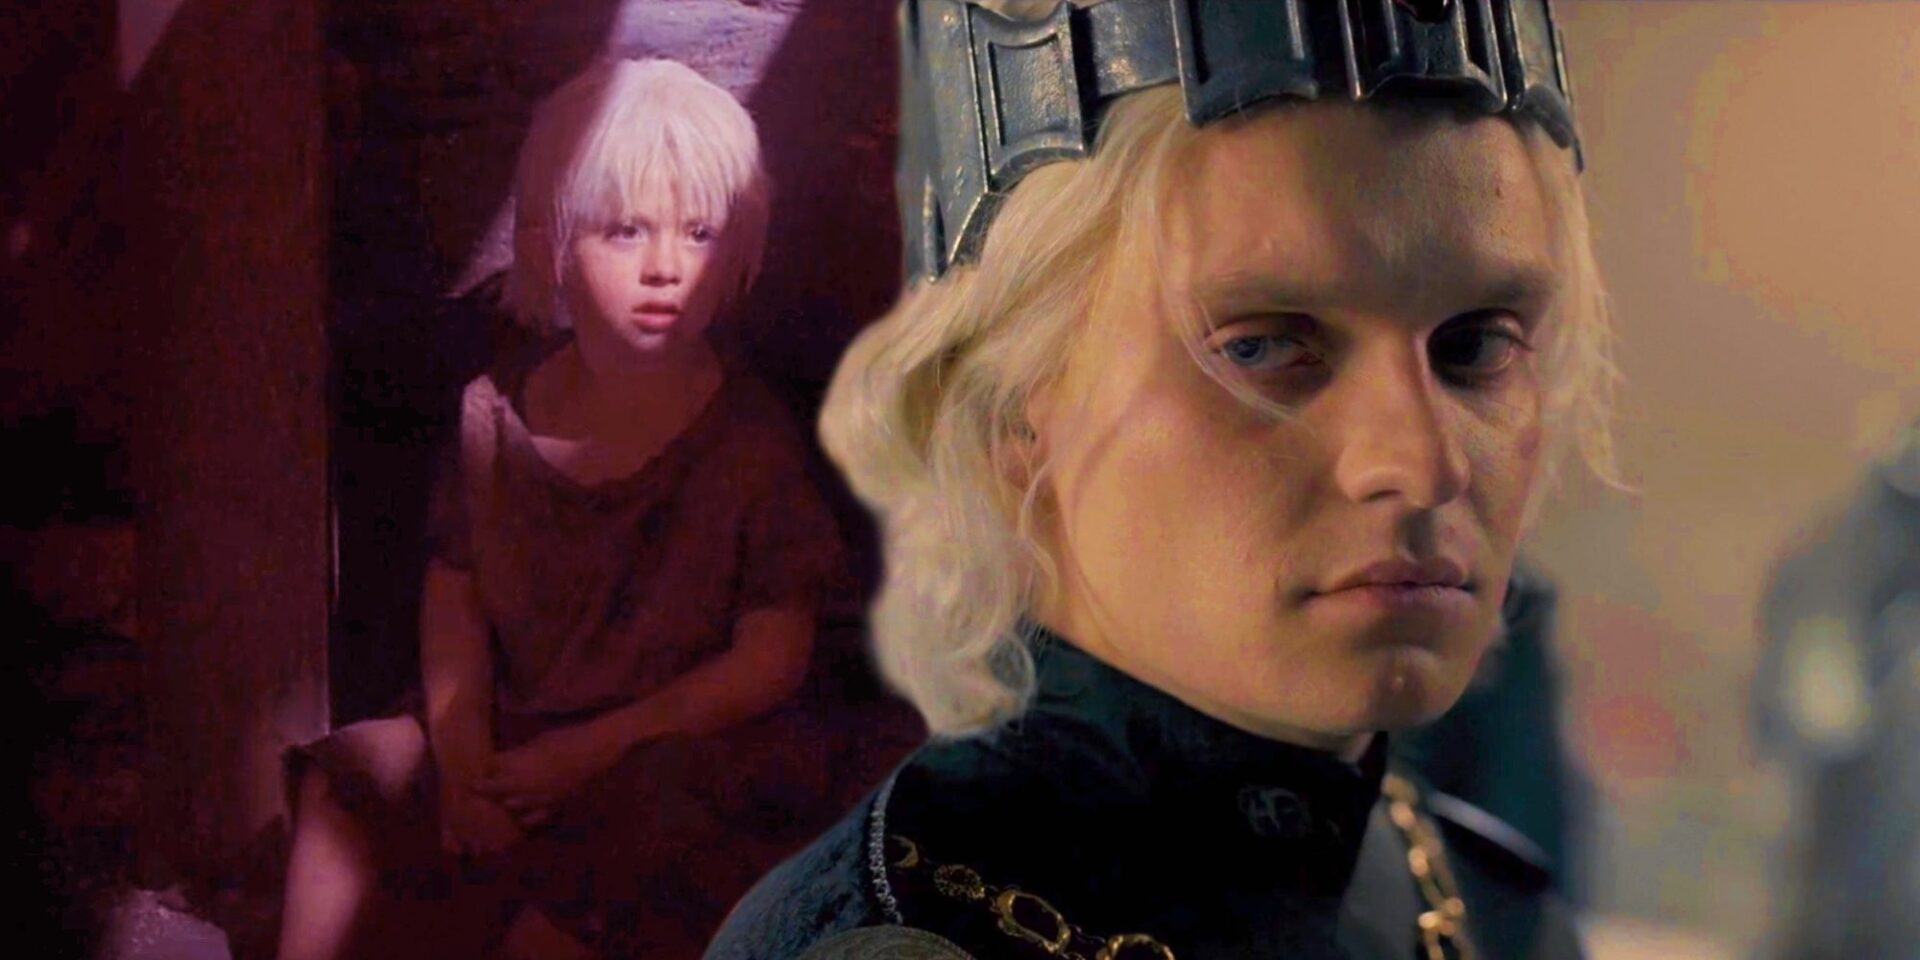 Is That Blonde Kid Really Aegon's Bastard? Why He's So Important